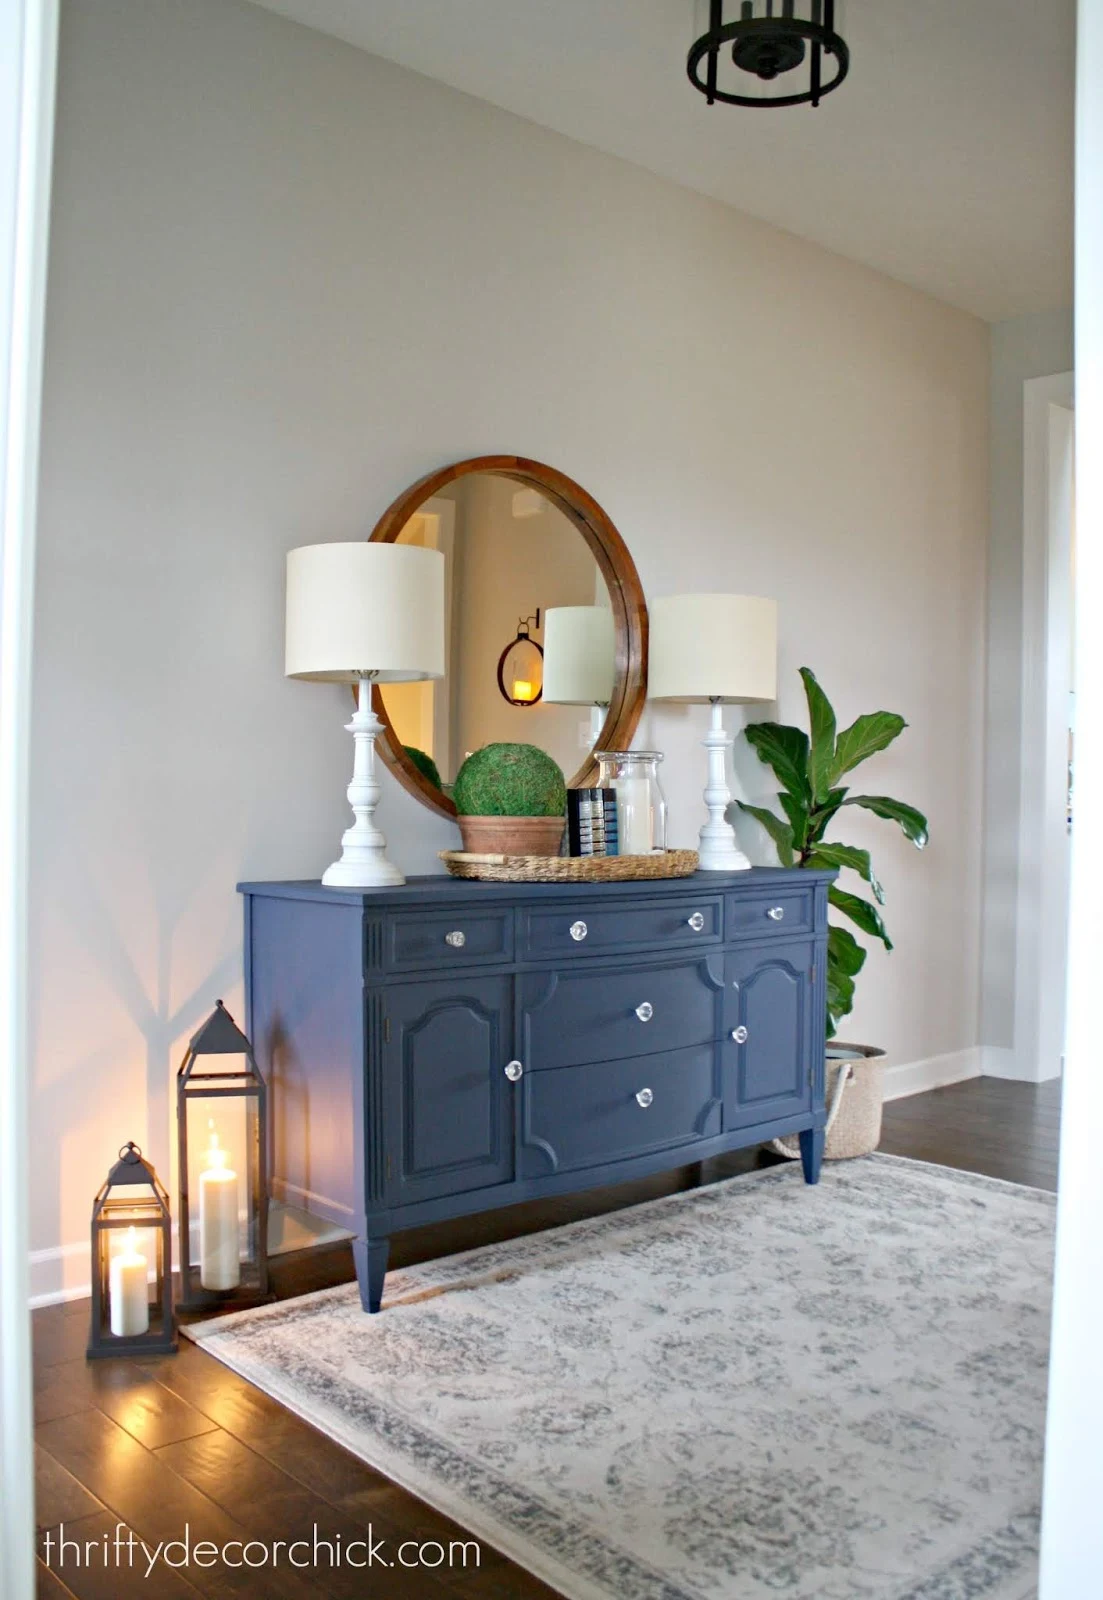 Dresser in foyer with lamps